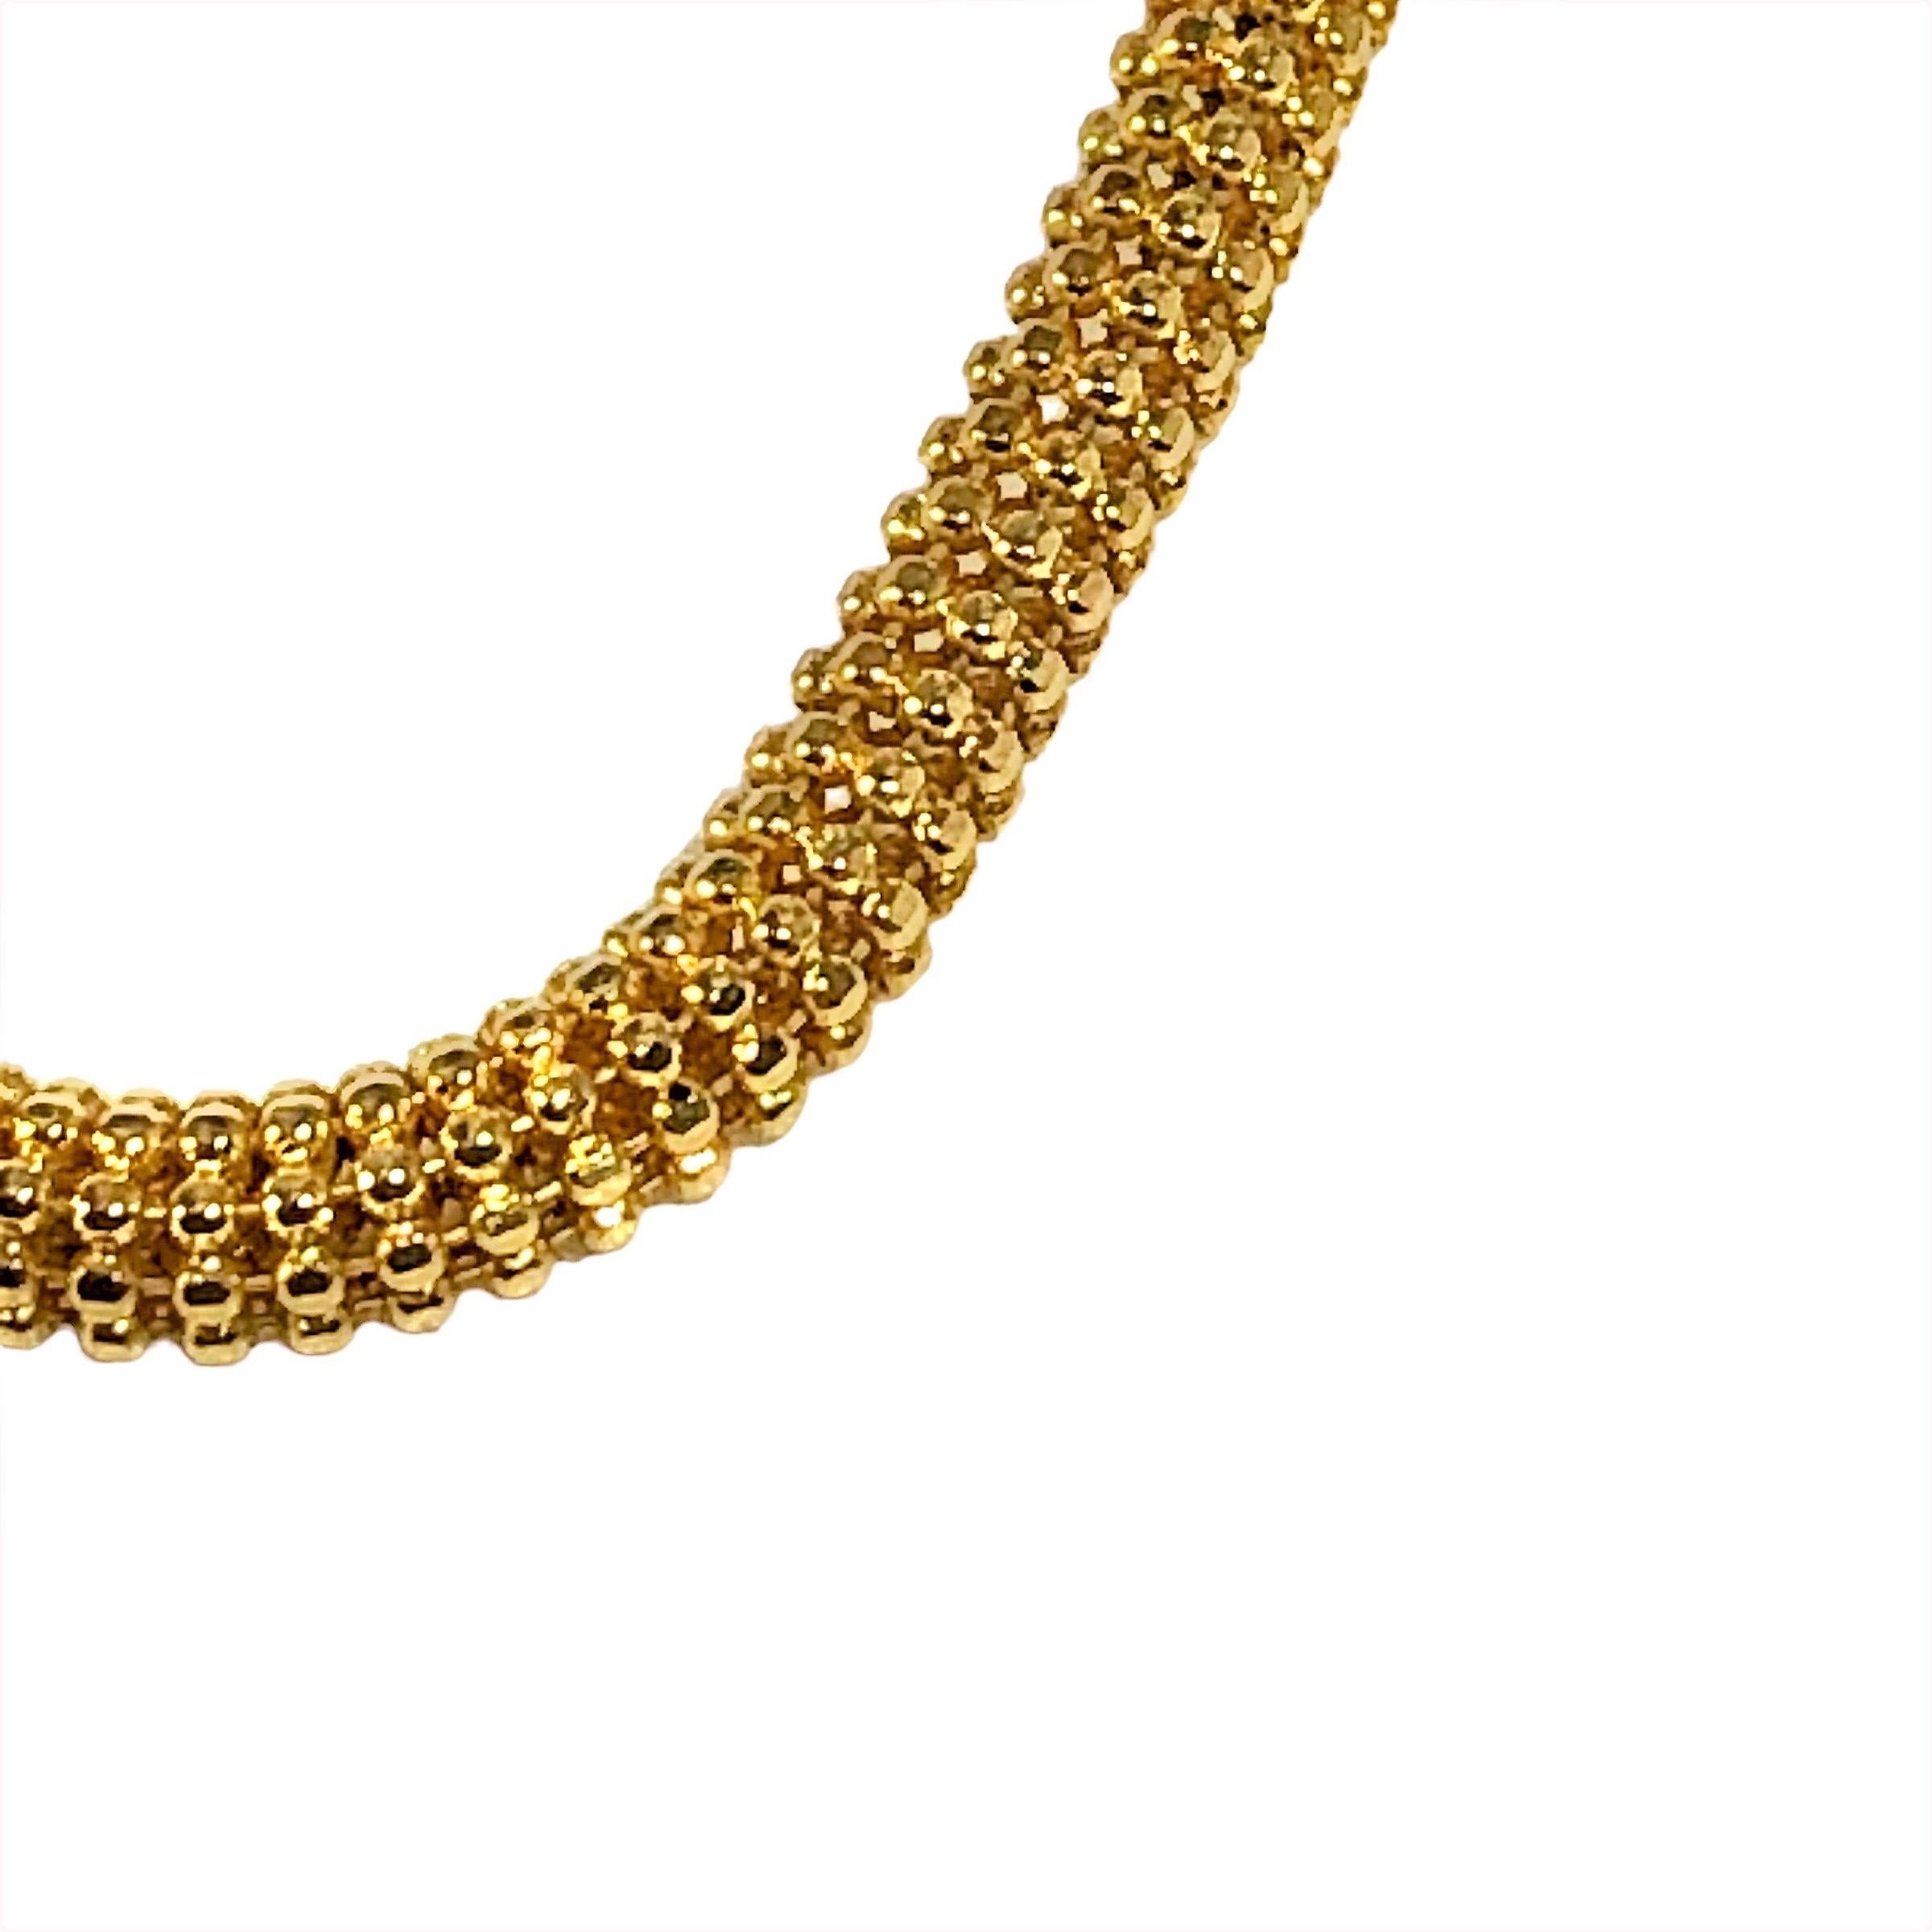 This stylish, round, 14K yellow gold necklace is not only very beautiful, but it's constructed in the fashion of the very best items coming from Italian craftsmen. Each individual link is attached the the next by means of eight connecting wires